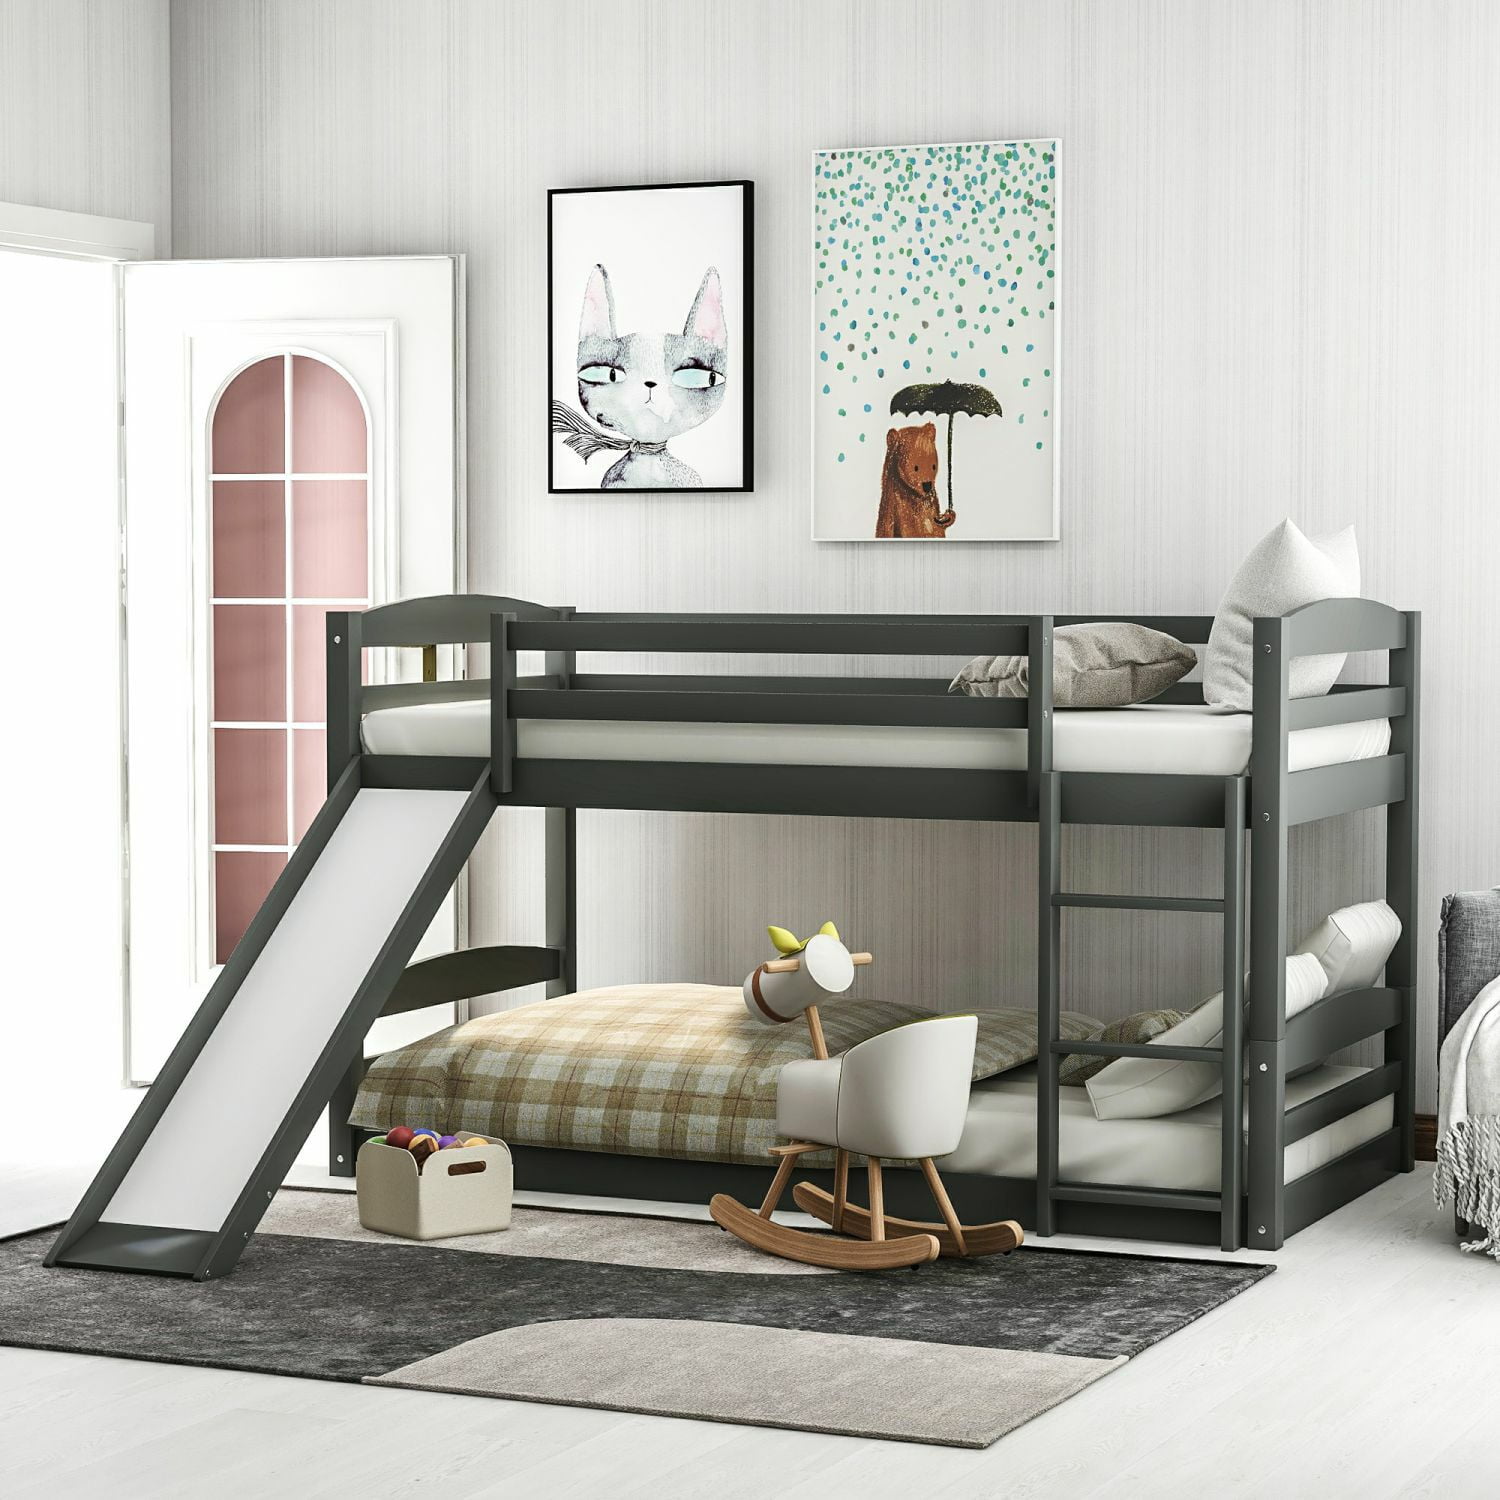 Modern Solid Wood Low Bunk Bed Twin, Can Bunk Beds With Stairs Be Separated